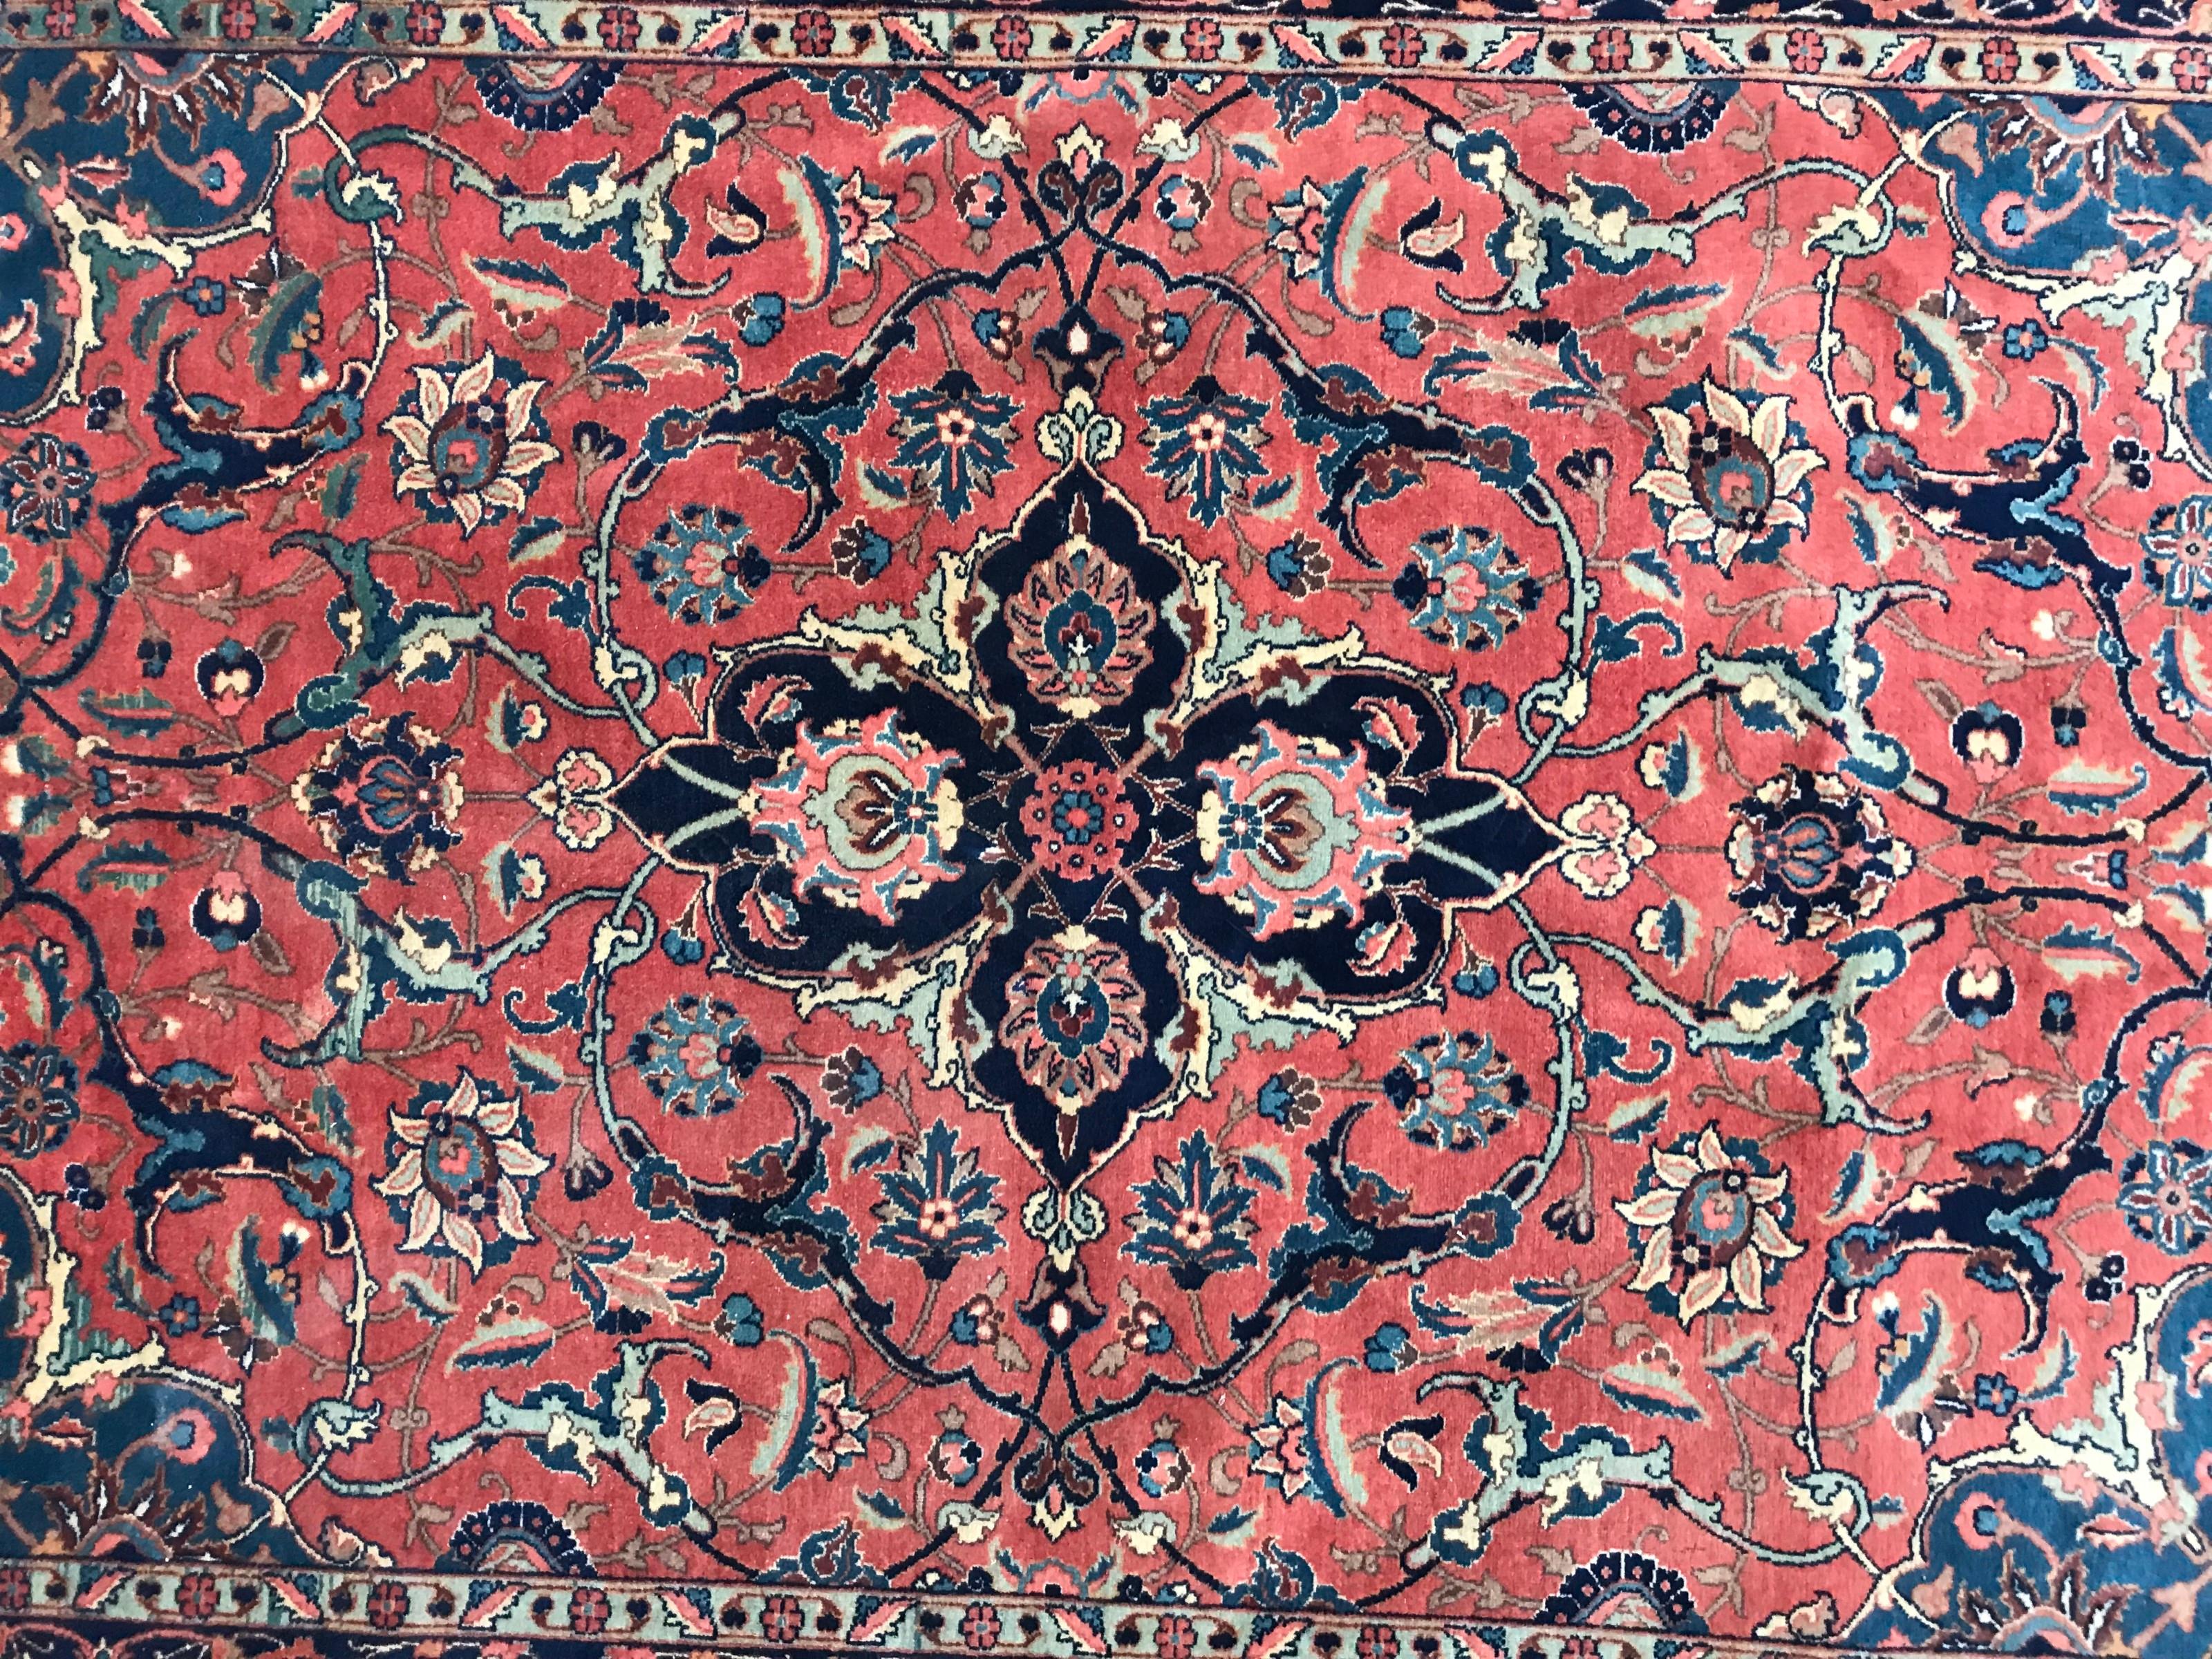 Exquisite antique rug featuring a stunning floral central medallion design and captivating natural colors, including shades of red, blue, and pink. Meticulously hand-knotted with wool velvet on a durable cotton foundation. Timeless elegance for your